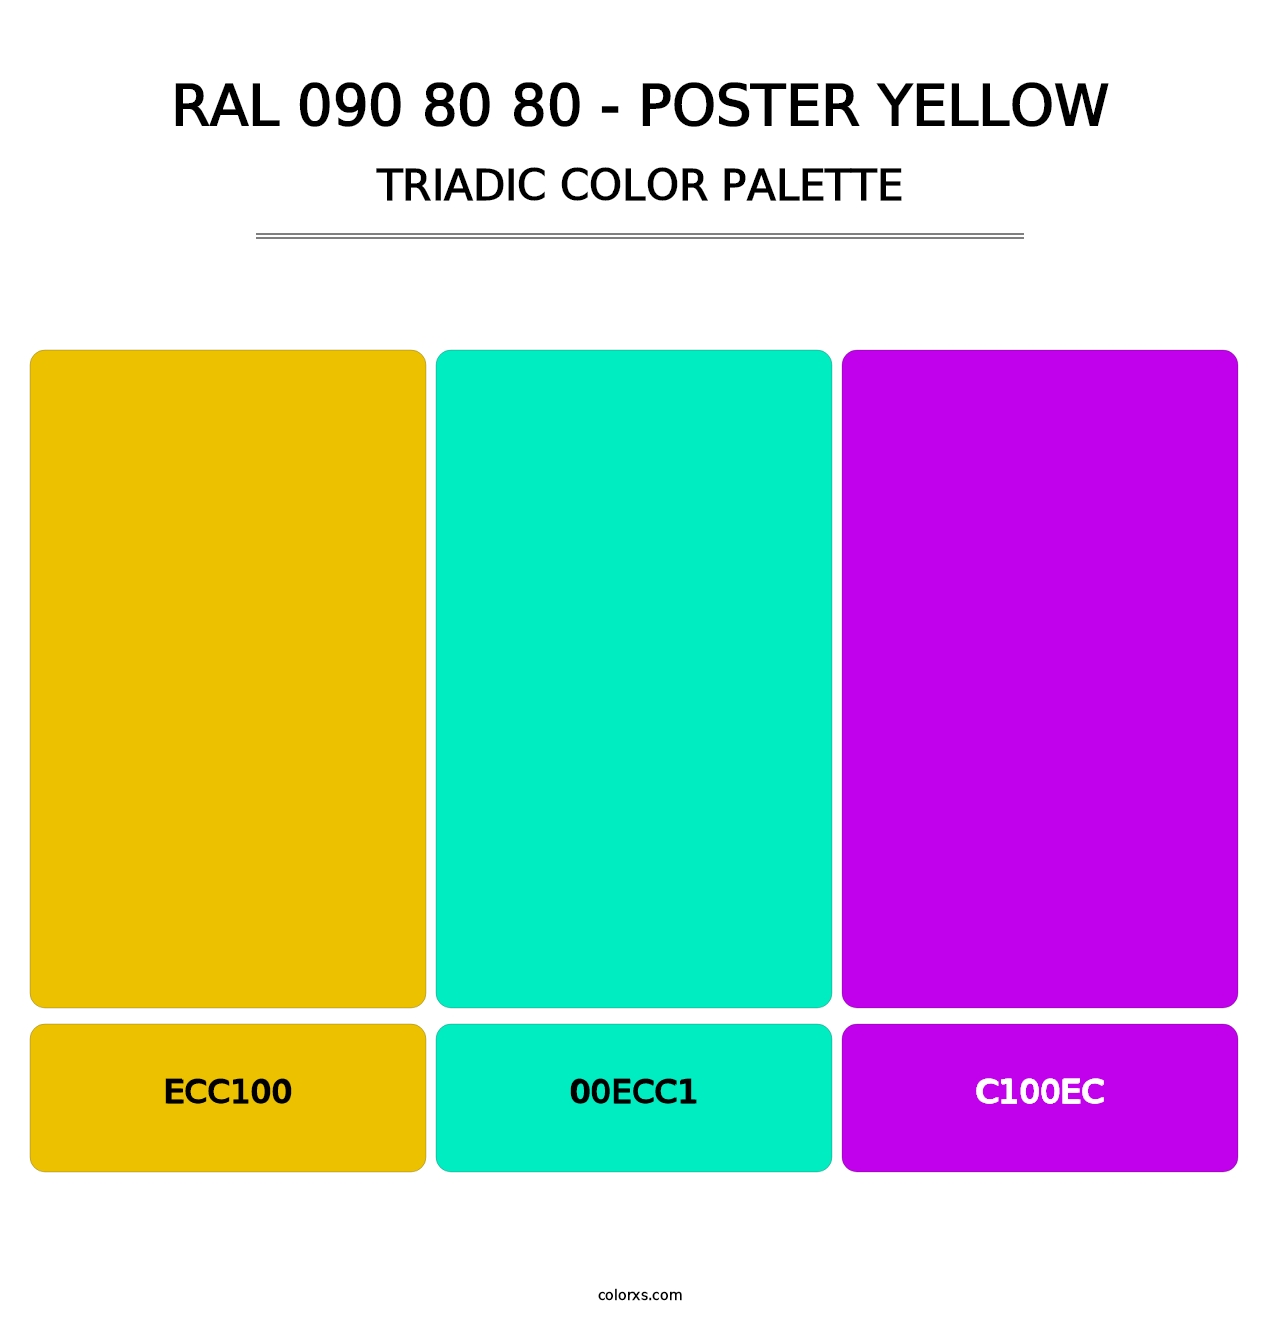 RAL 090 80 80 - Poster Yellow - Triadic Color Palette